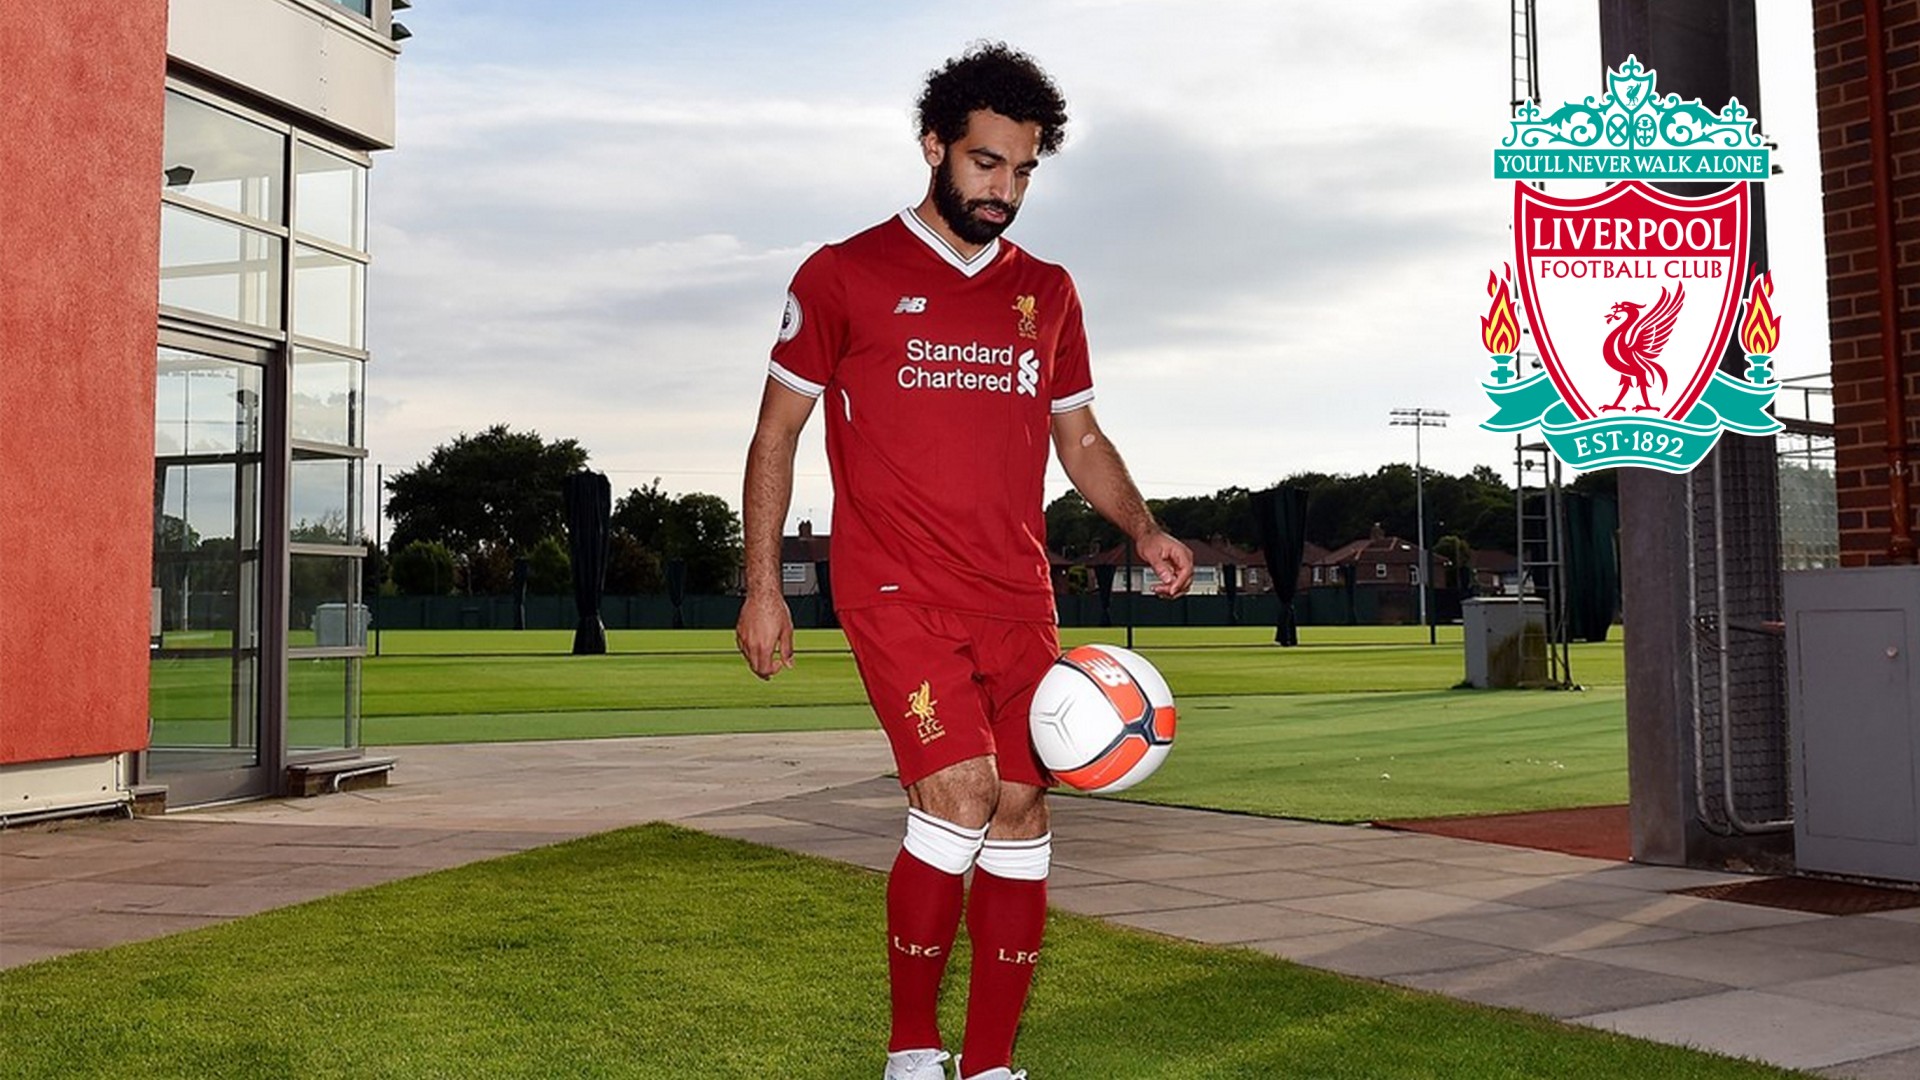 Best Liverpool Mohamed Salah Wallpaper HD with image resolution 1920x1080 pixel. You can make this wallpaper for your Desktop Computer Backgrounds, Mac Wallpapers, Android Lock screen or iPhone Screensavers